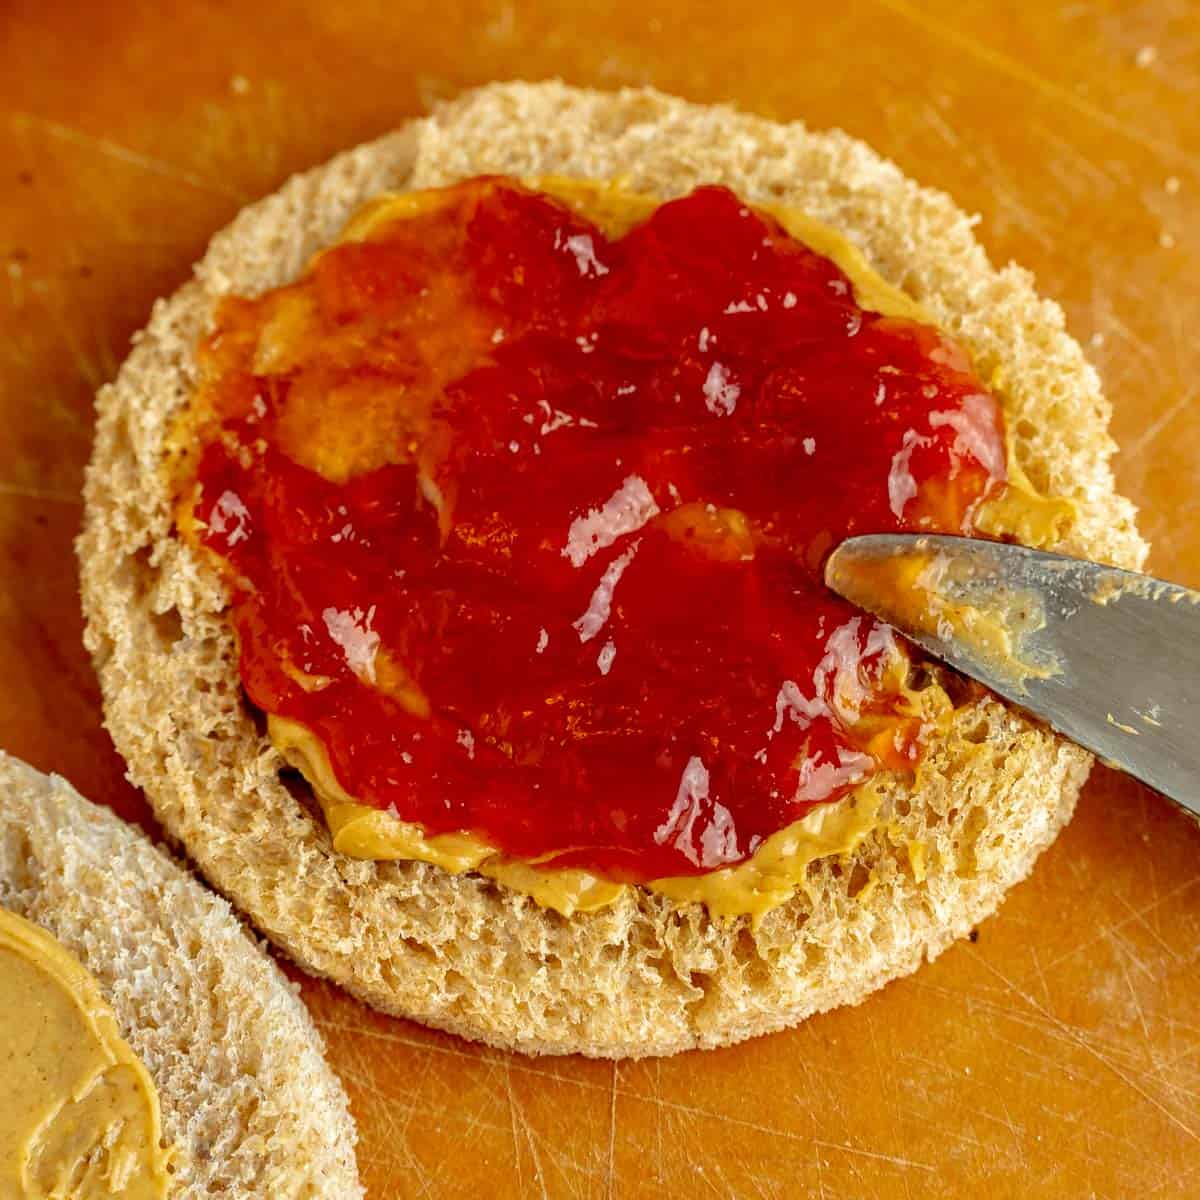 Jam spread with a butterknife onto a bread circle.